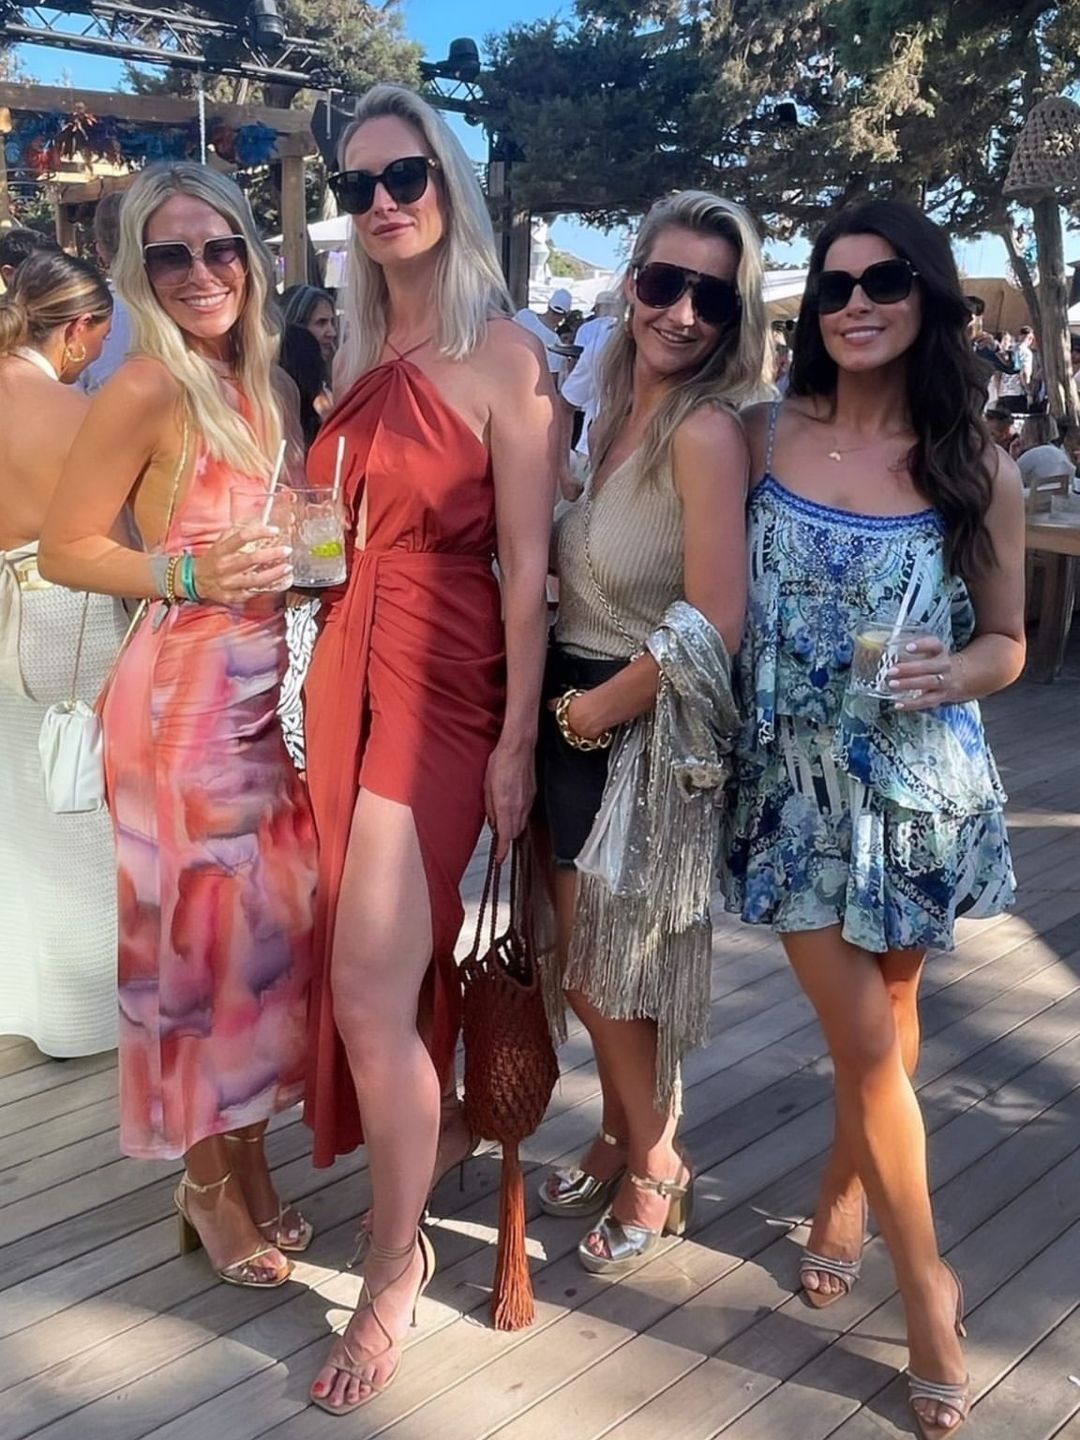 Helen Skelton in black shorts and a gold top and heels with friends